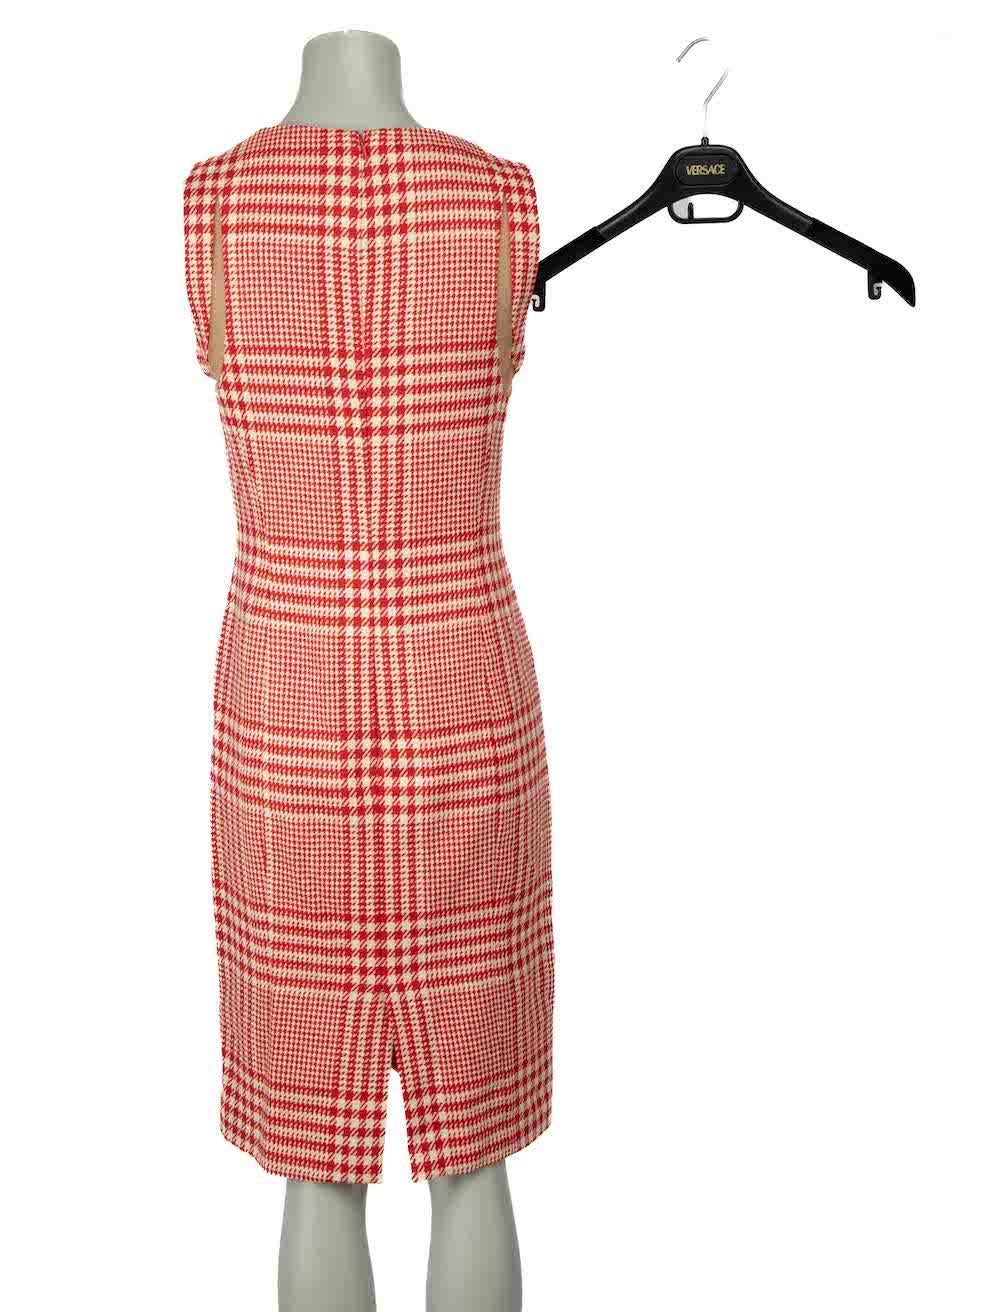 Versace Red Houndstooth Sleeveless Dress Size L In Excellent Condition For Sale In London, GB